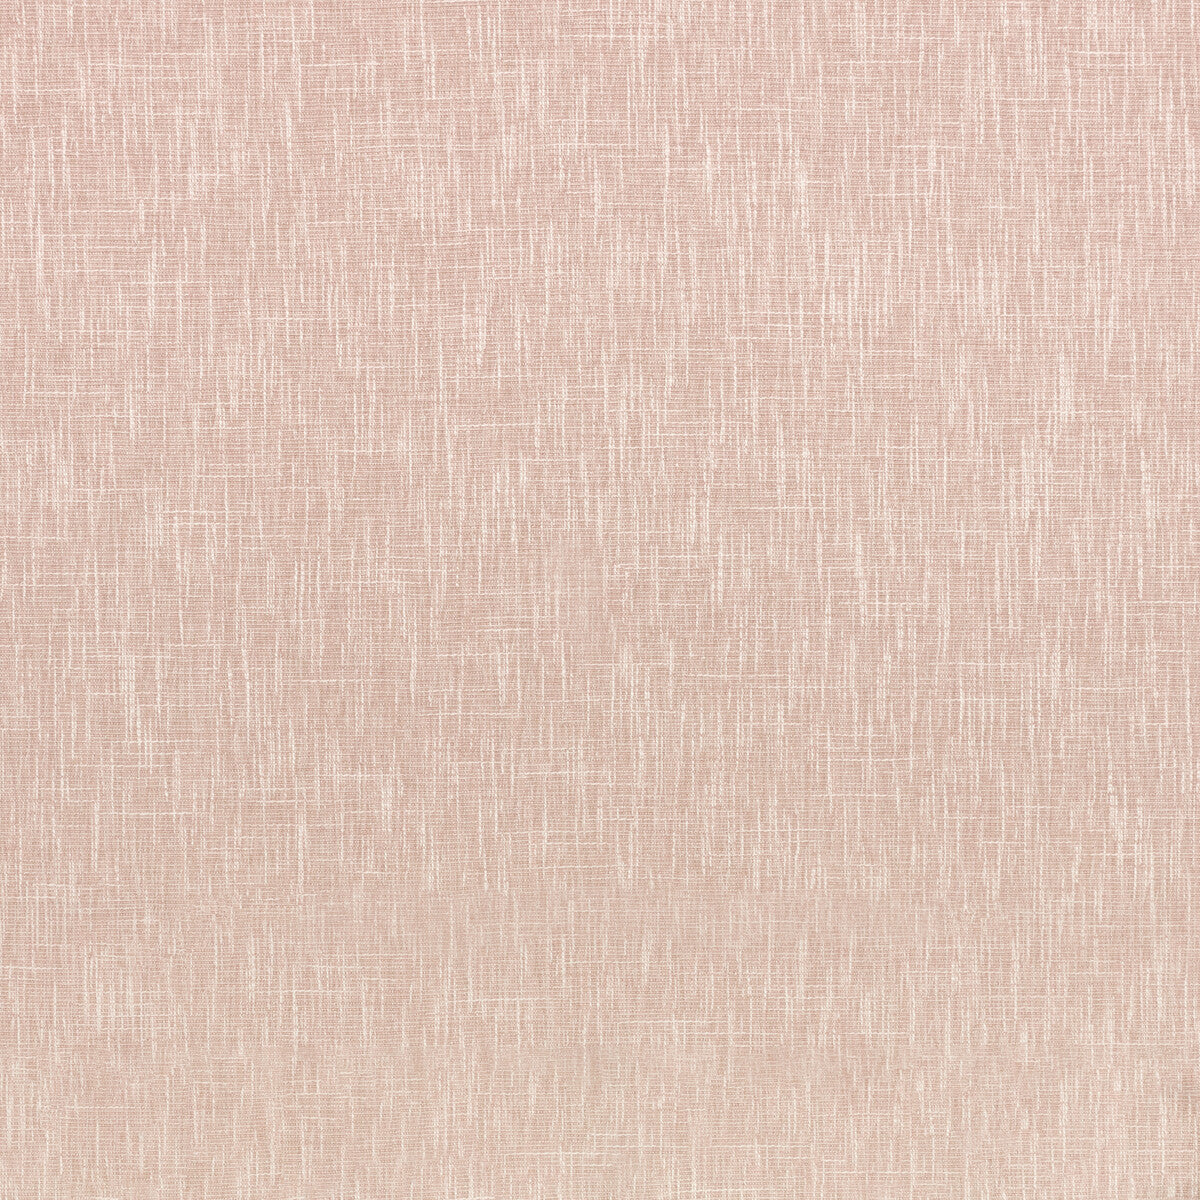 Maris fabric in blush color - pattern 35923.17.0 - by Kravet Basics in the Monterey collection